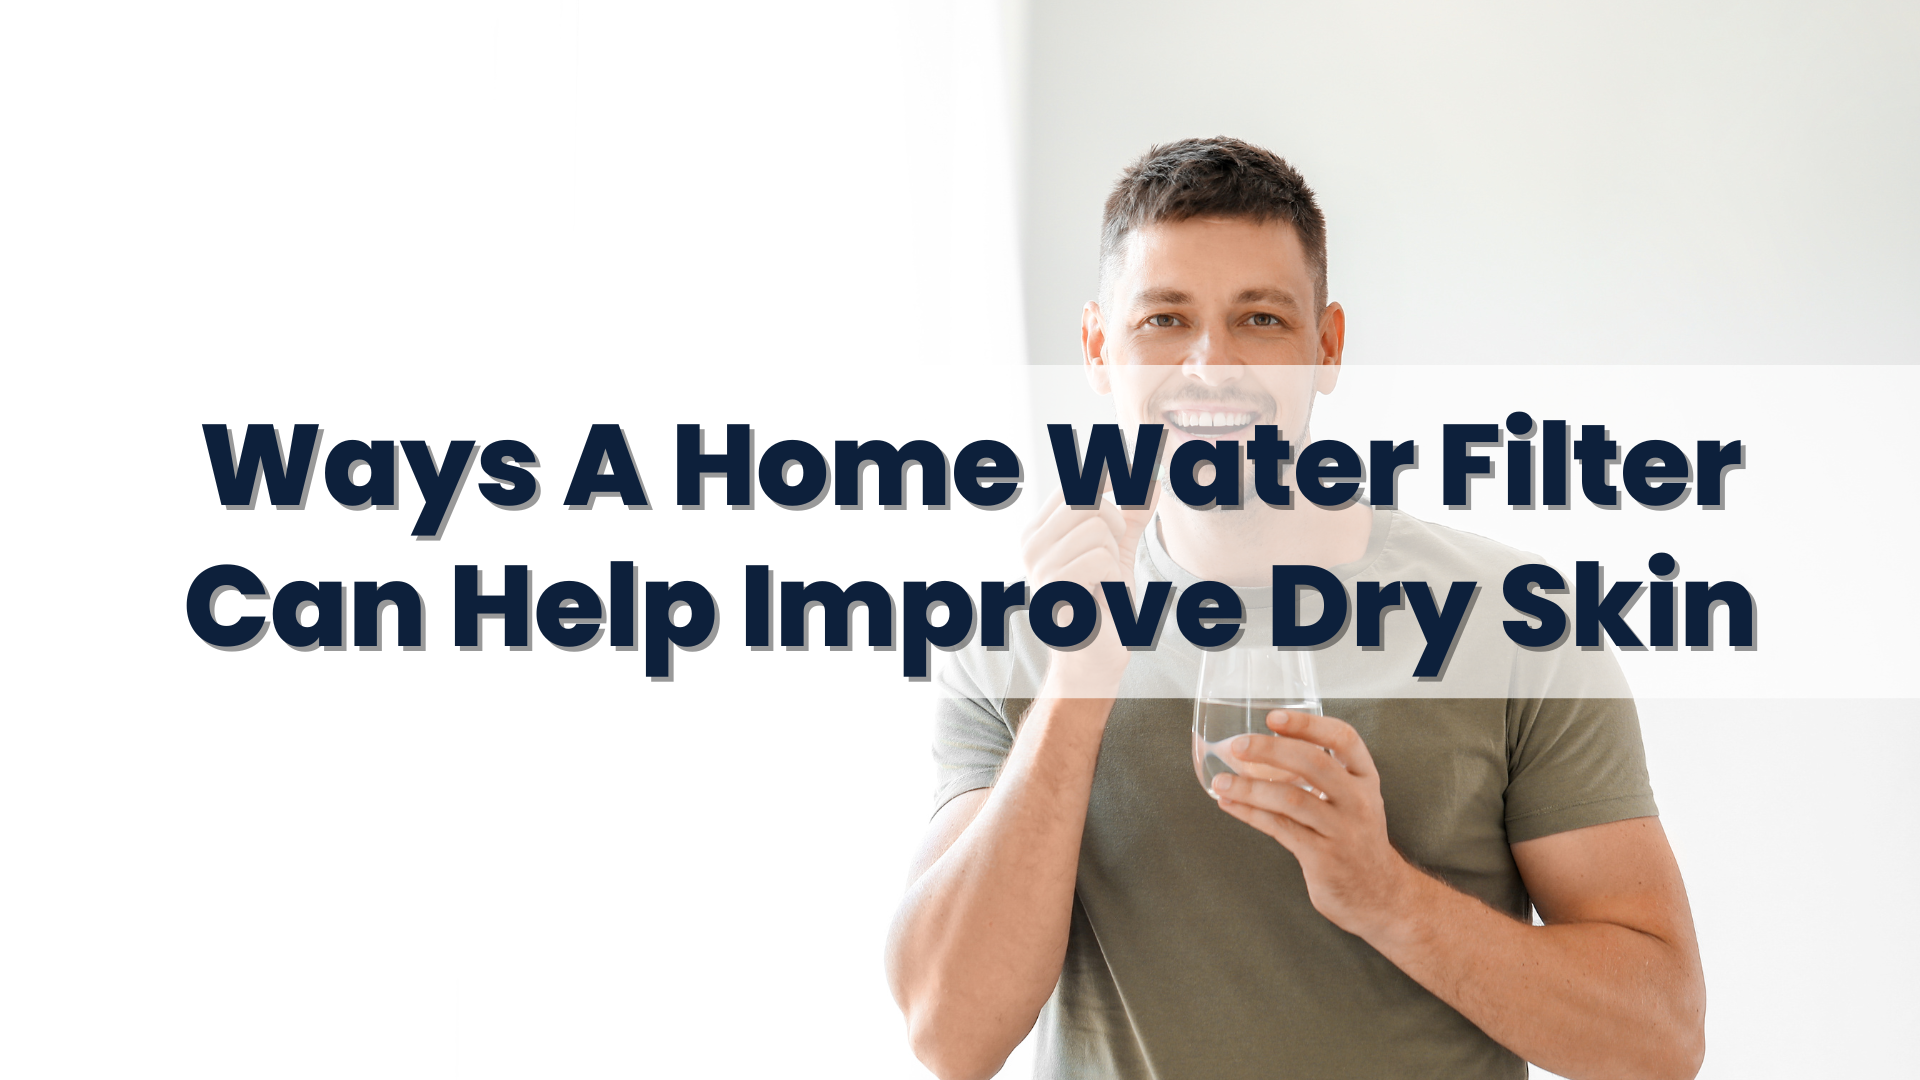 Ways a home water filter can help improve dry skin